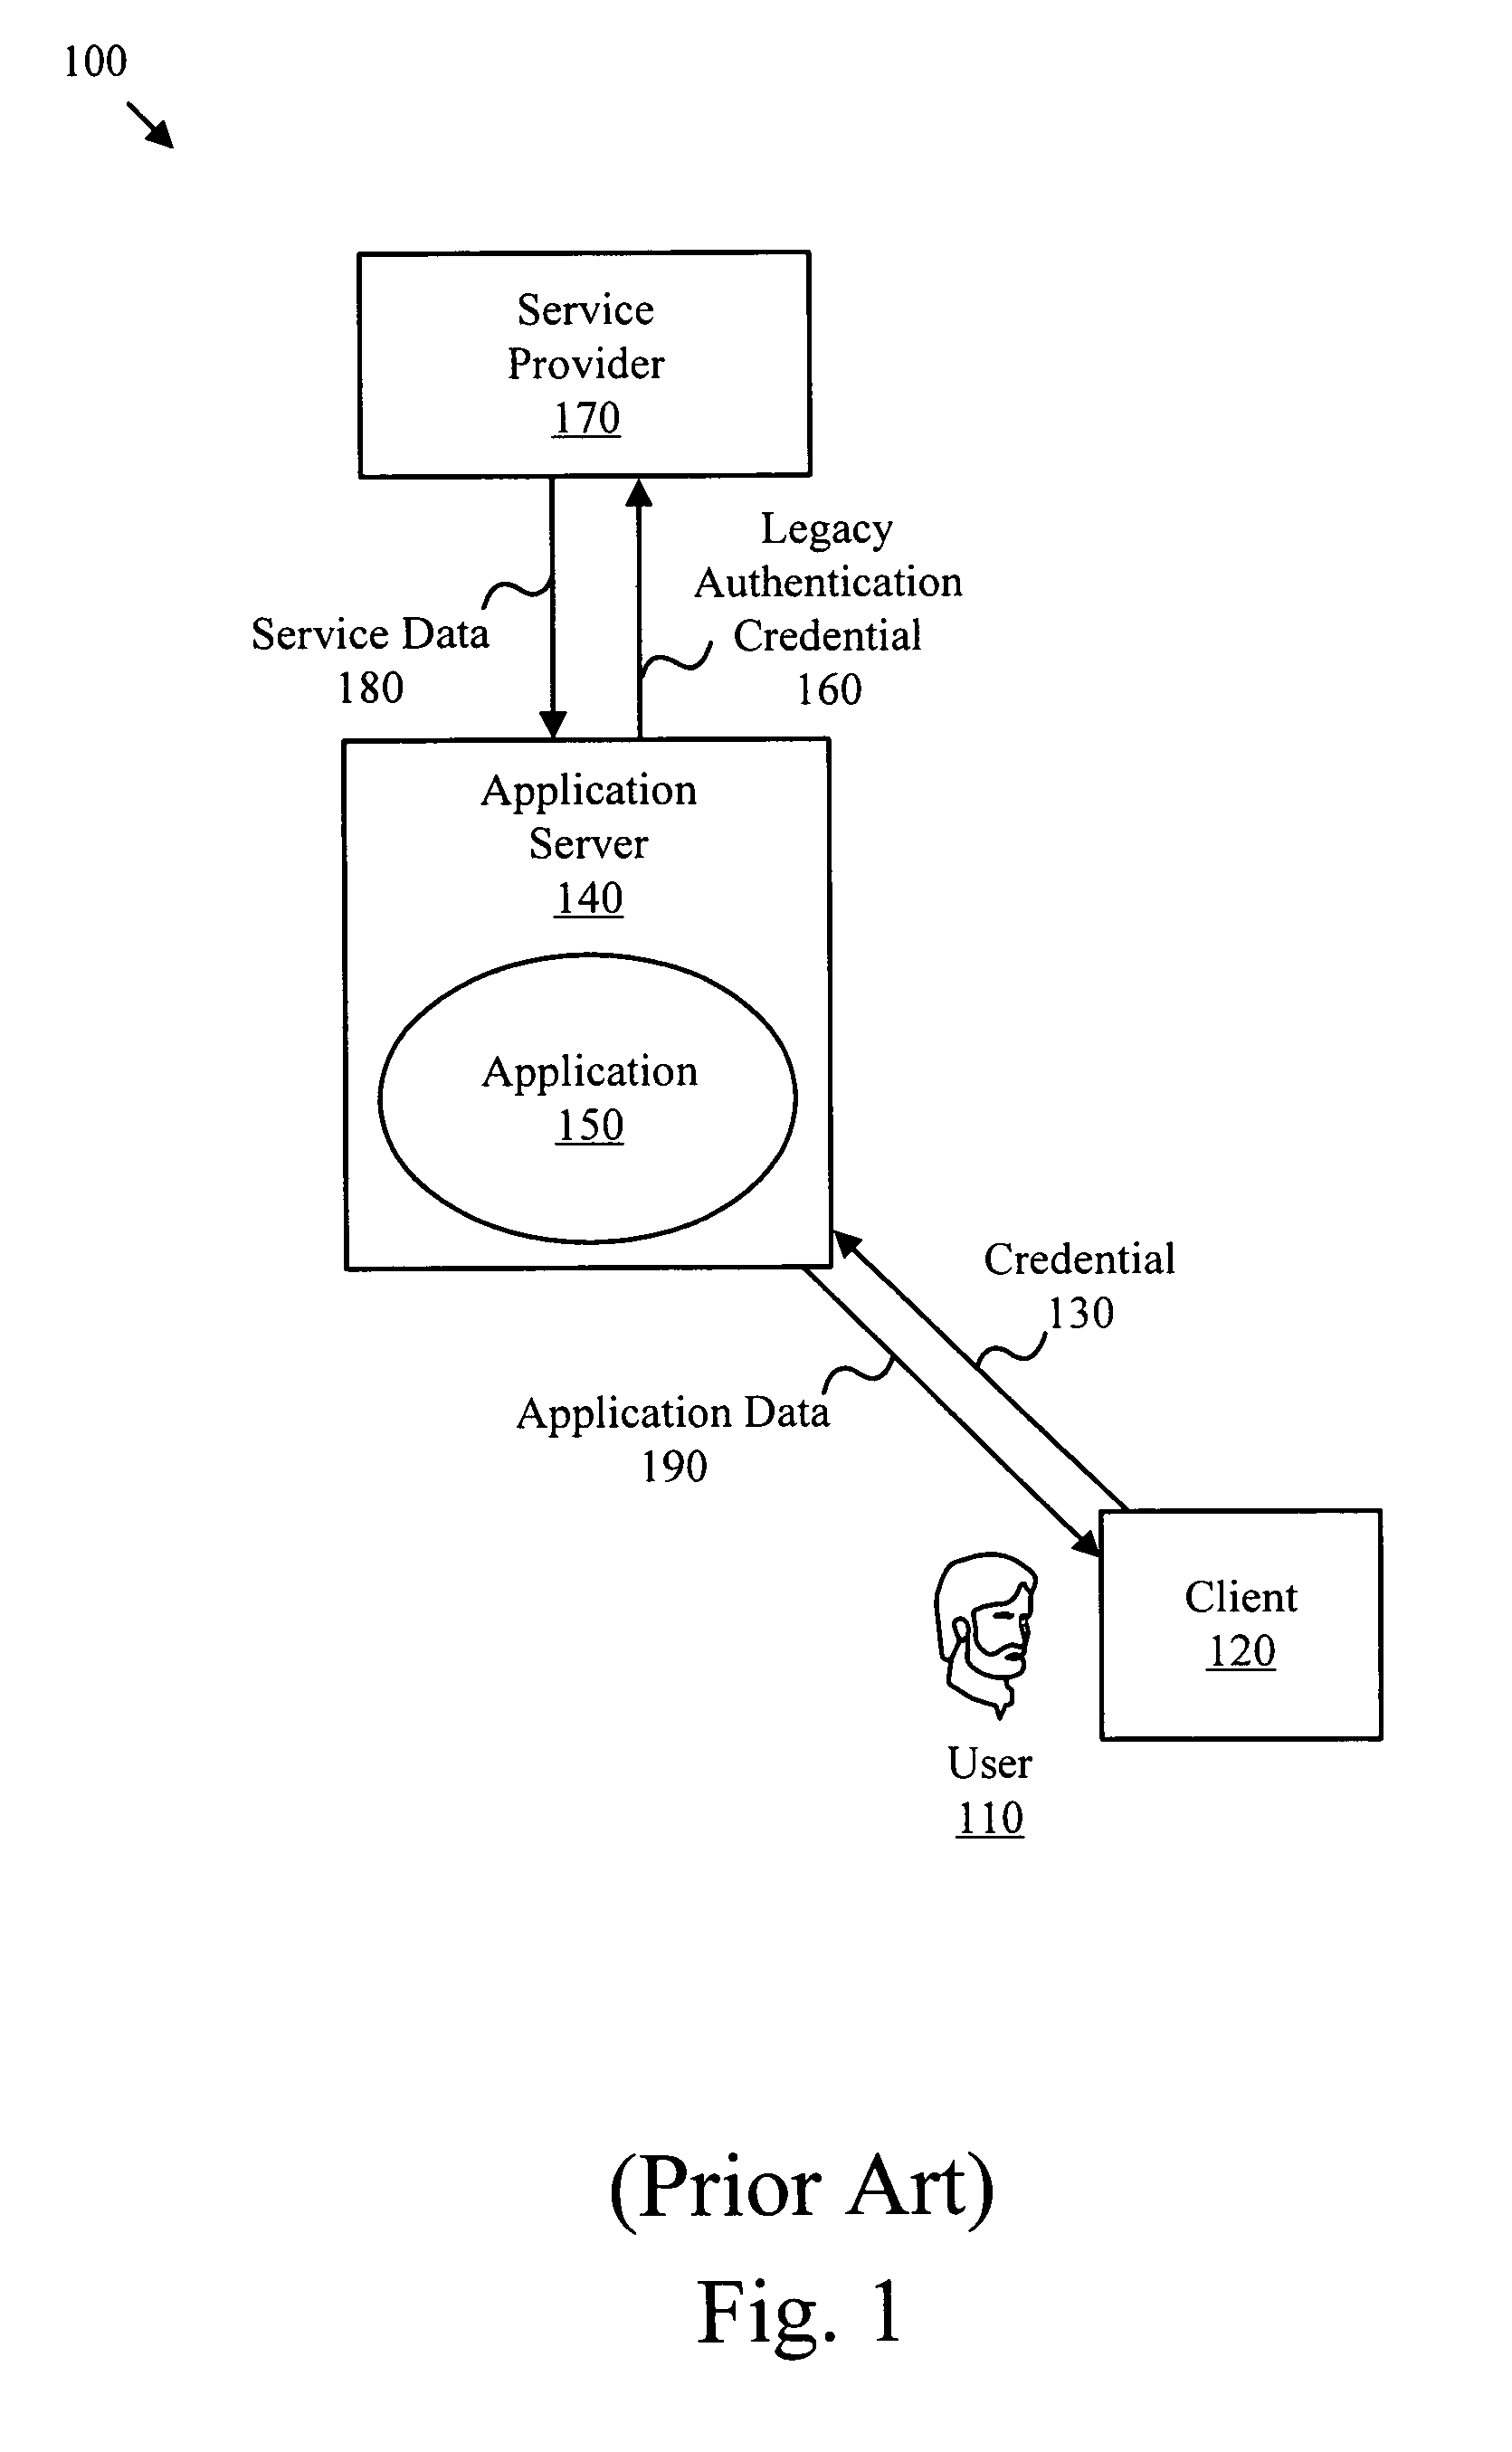 Apparatus, systems and methods to provide authentication services to a legacy application